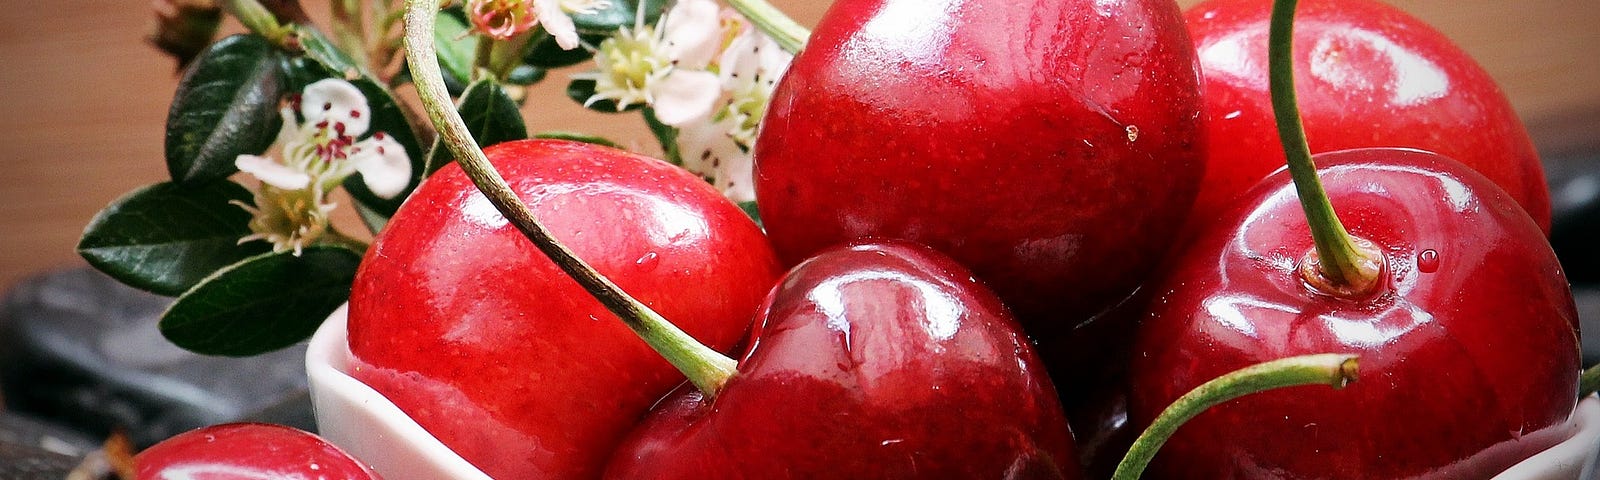 A close-up of a glossy red cherries in a white bowl. A sprig of white blossom and leaves is in the background.